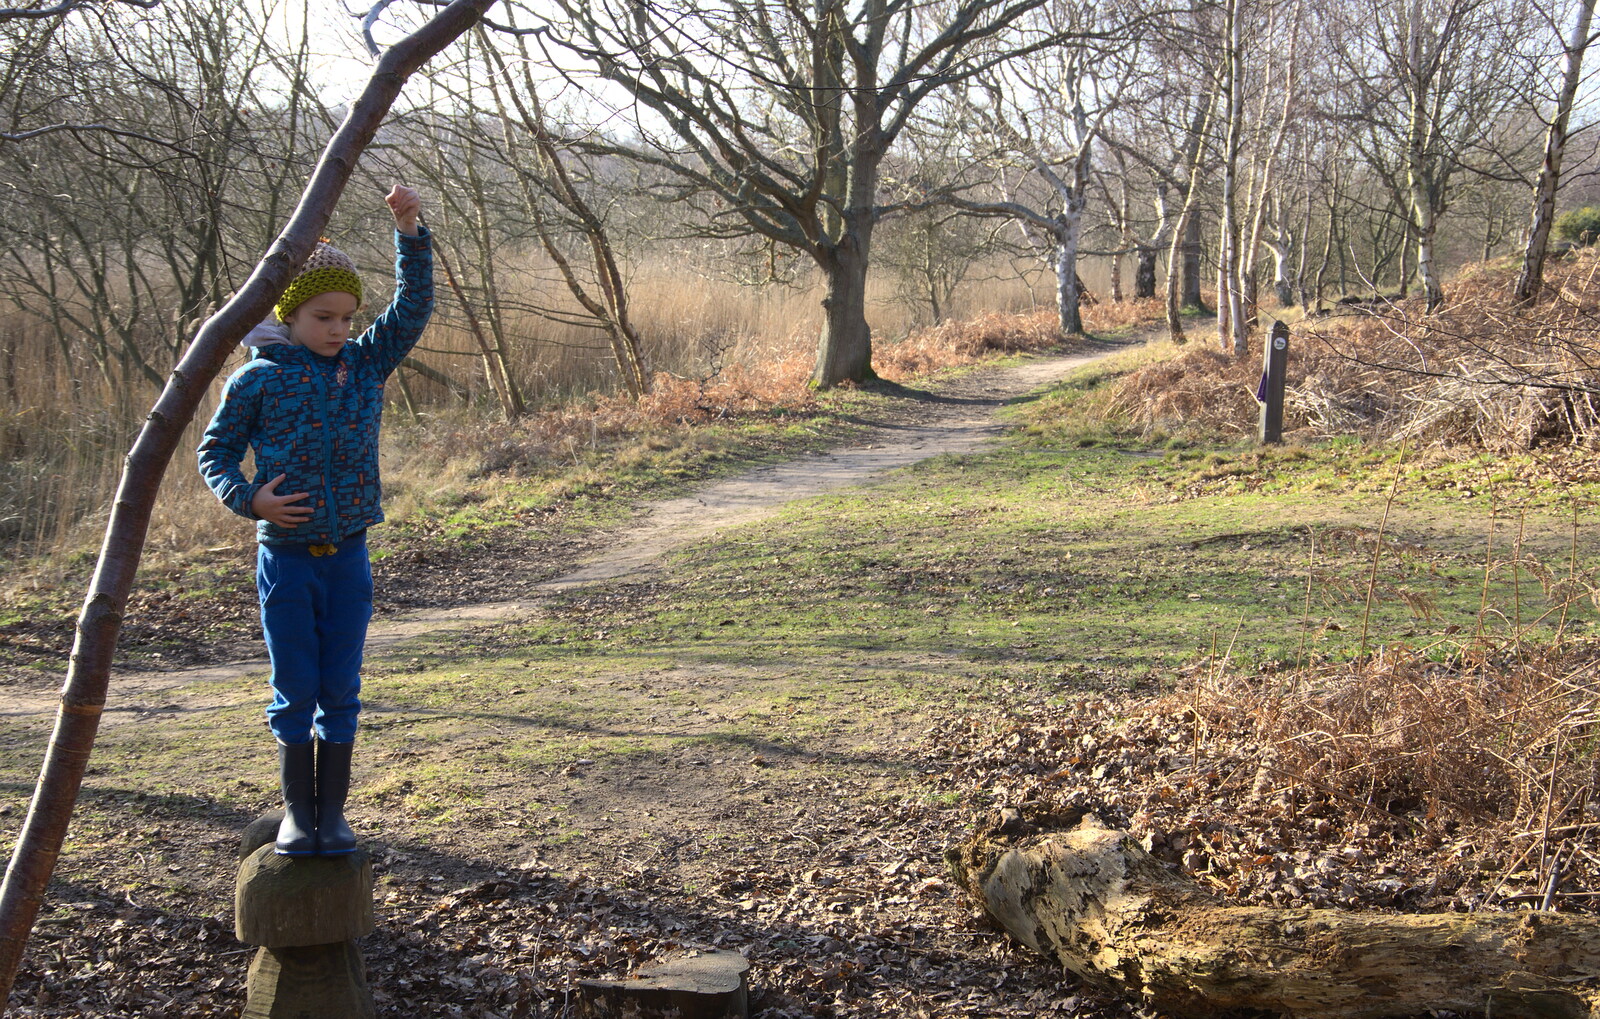 Harry stands on a wooden mushroom from A Trip to Dunwich Heath, Dunwich, Suffolk - 17th February 2019